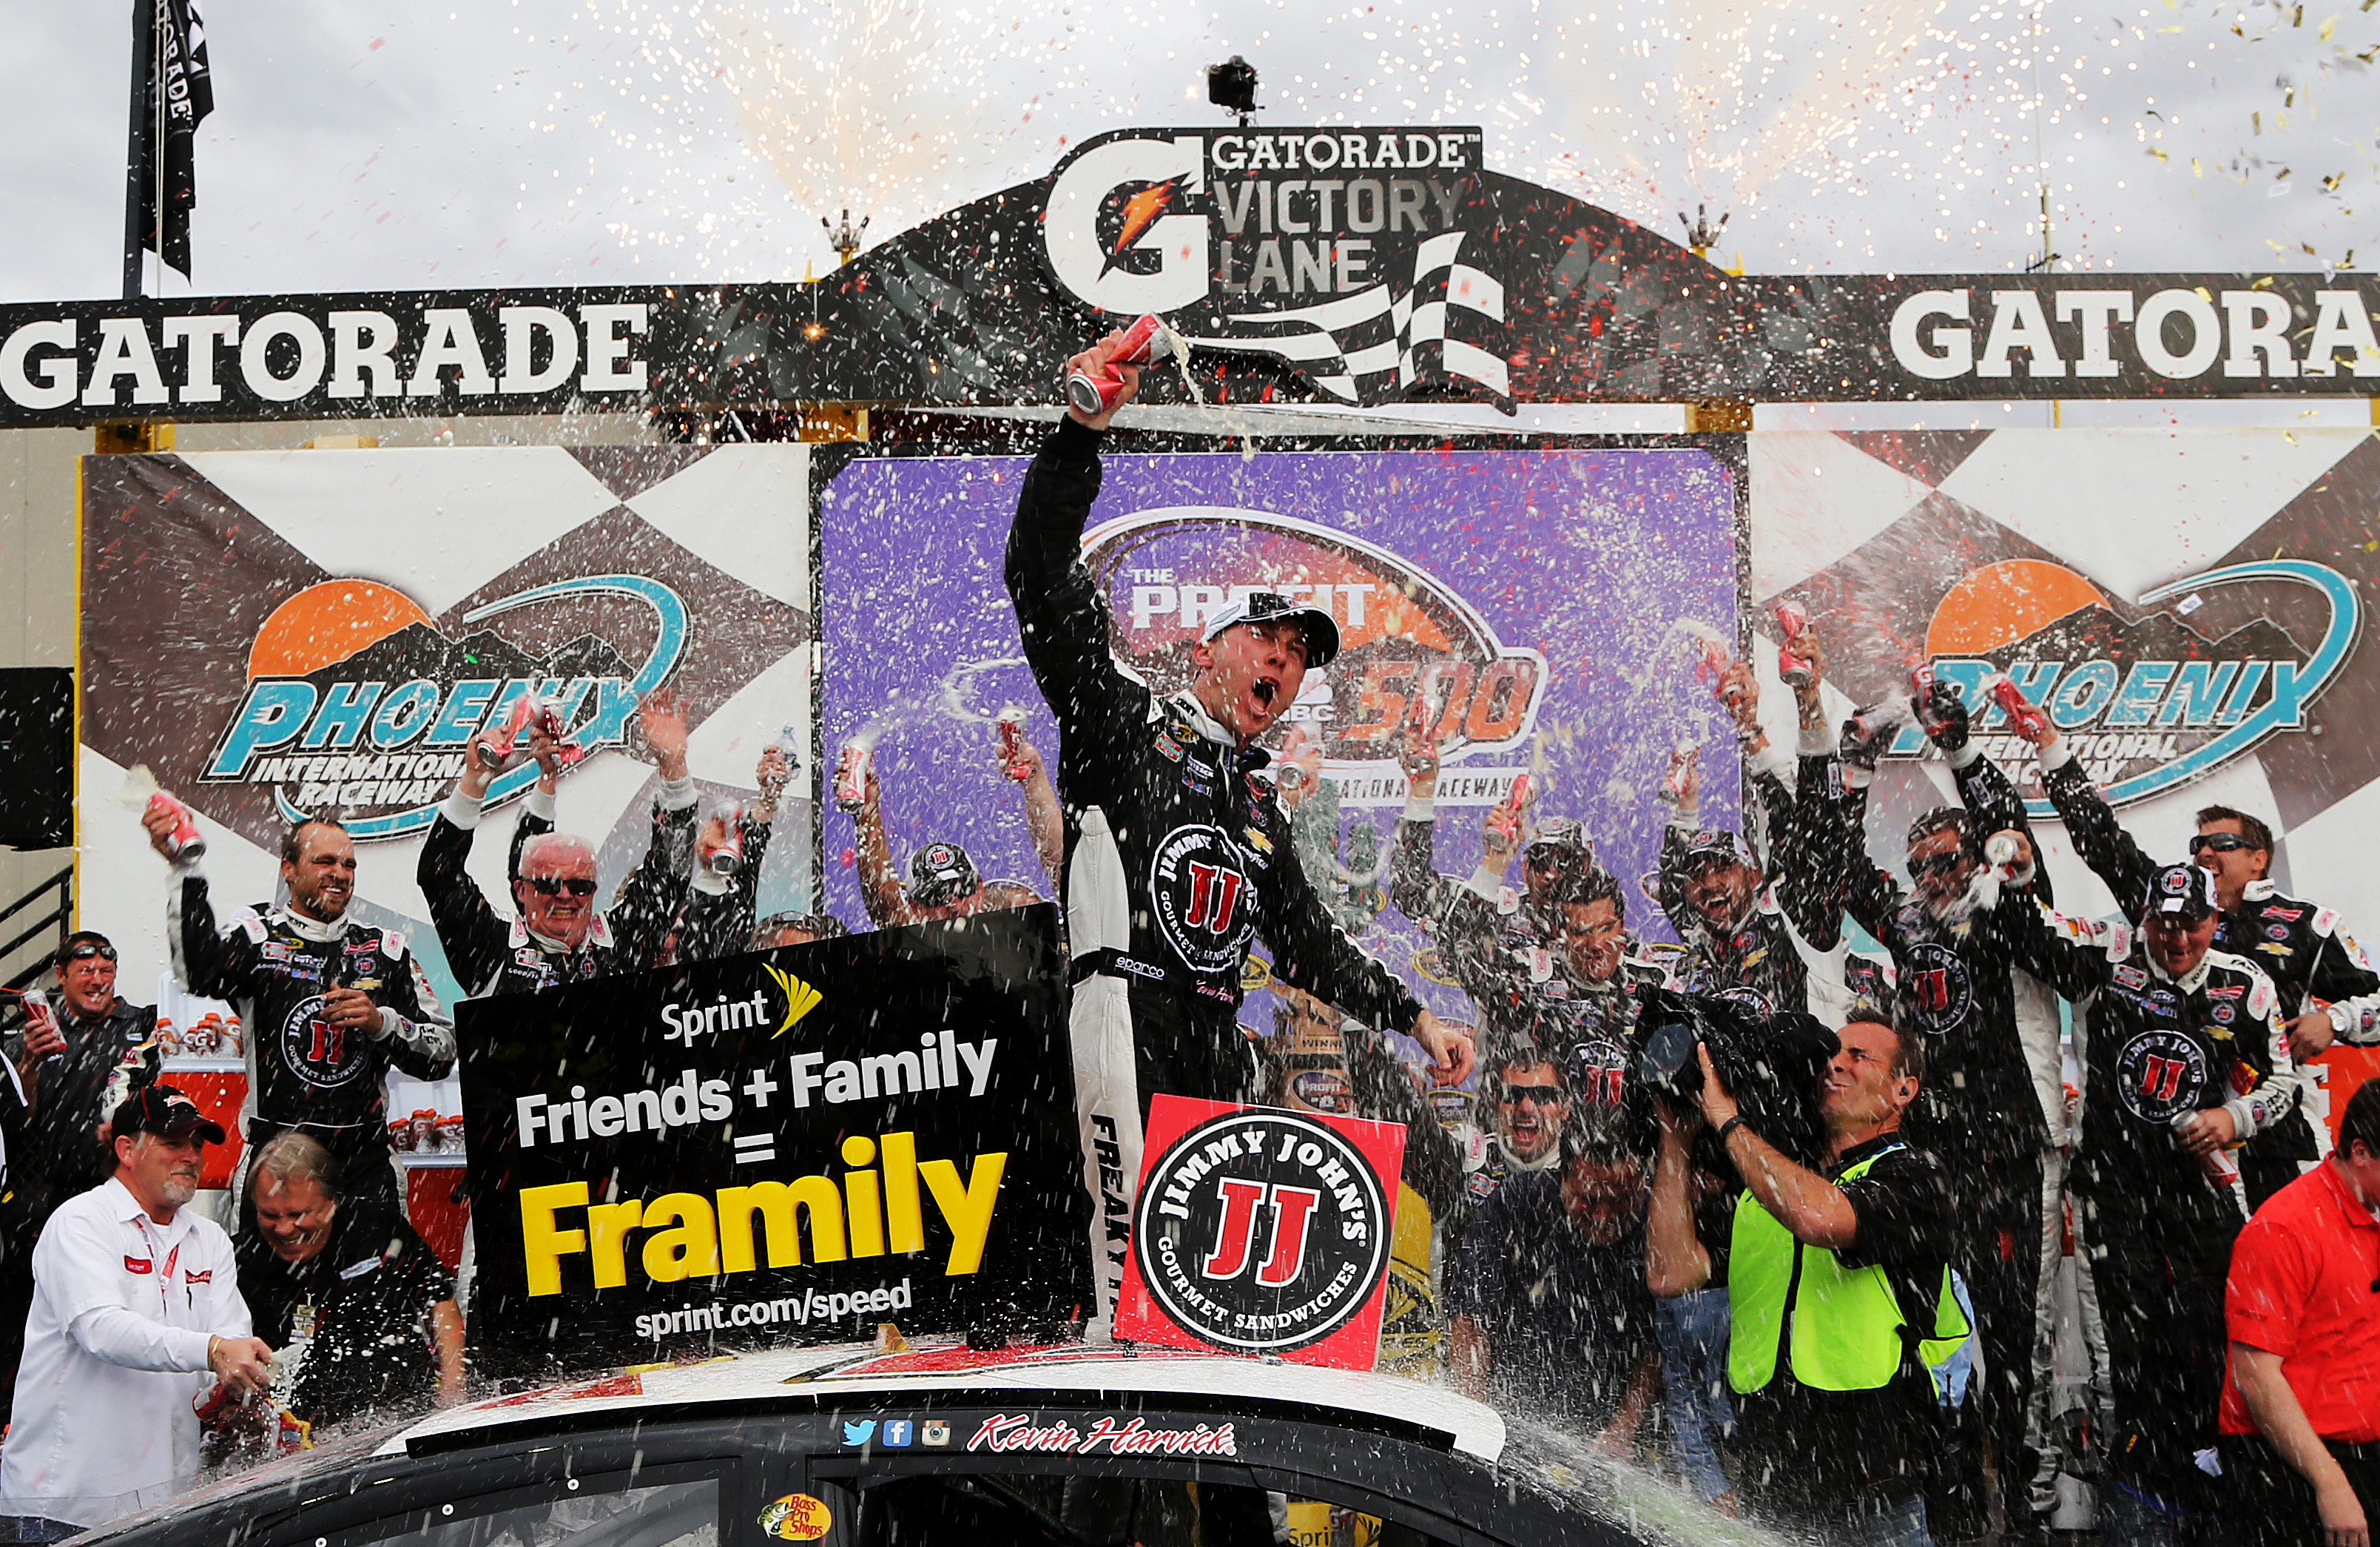 A dominating performance is the only way to sum up Kevin Harvick's win at Phoenix.